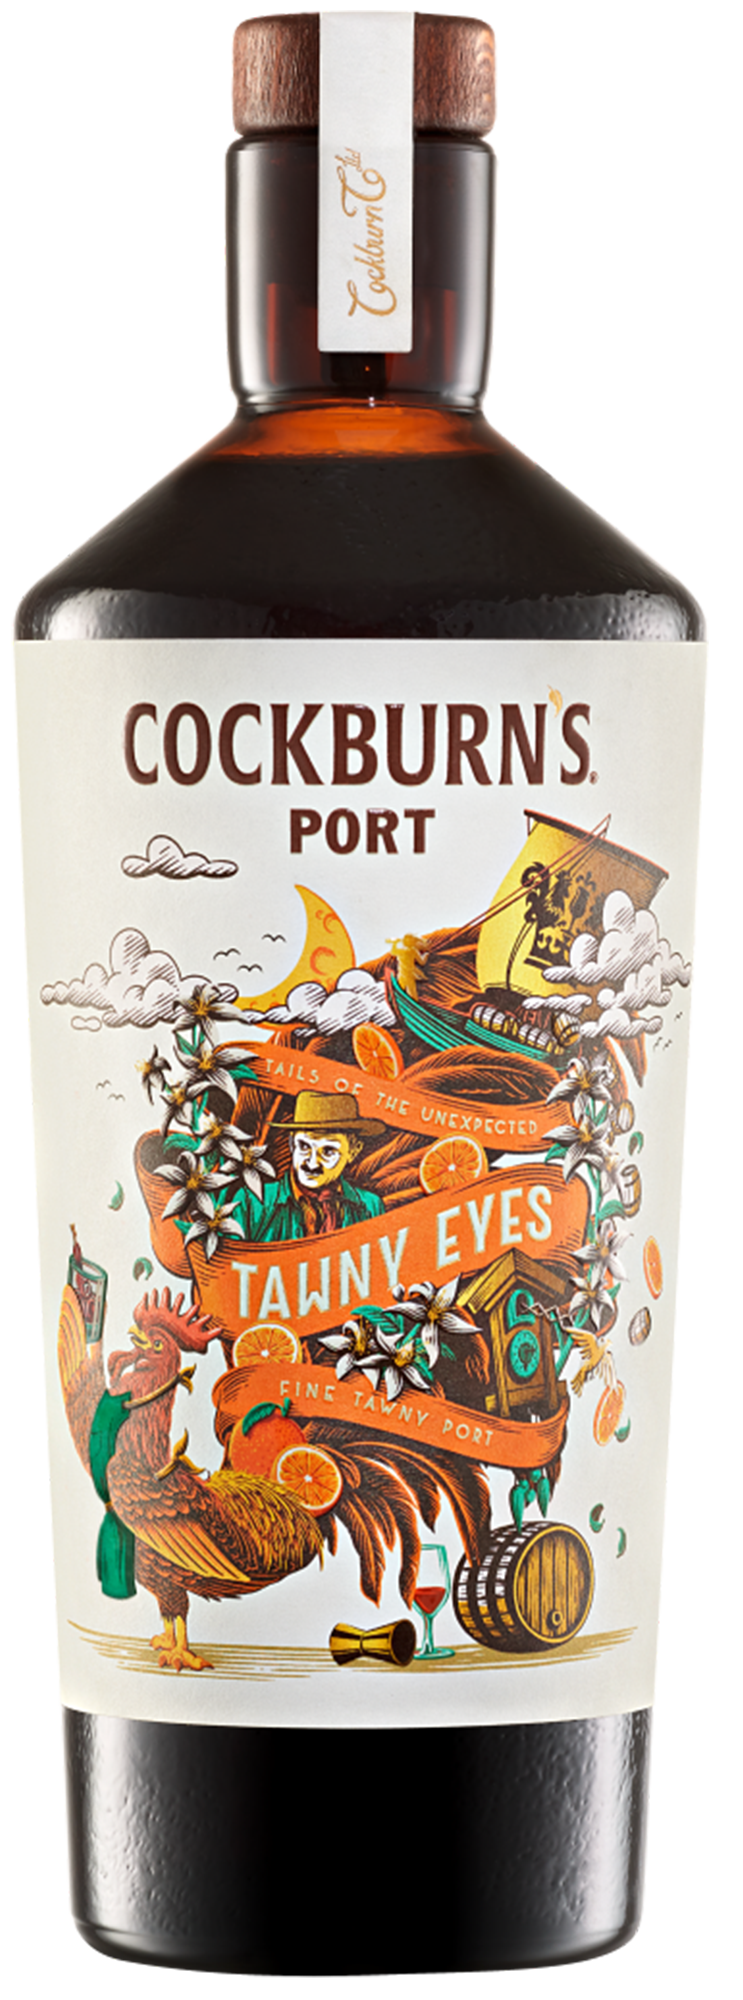 Product Image for COCKBURN'S 'TAILS OF THE UNEXPECTED' TAWNY EYES